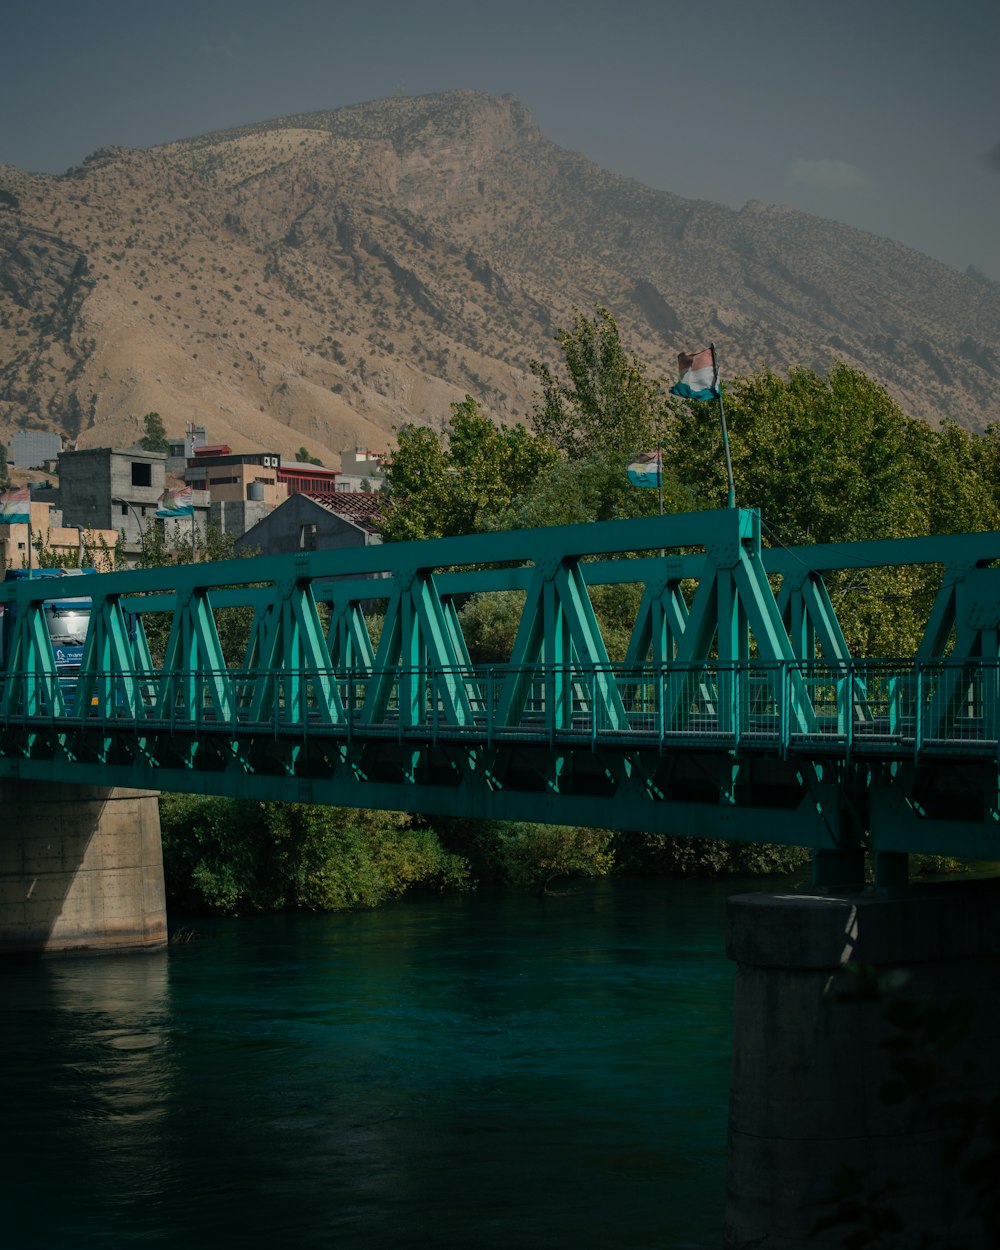 a bridge over a river with a mountain in the background